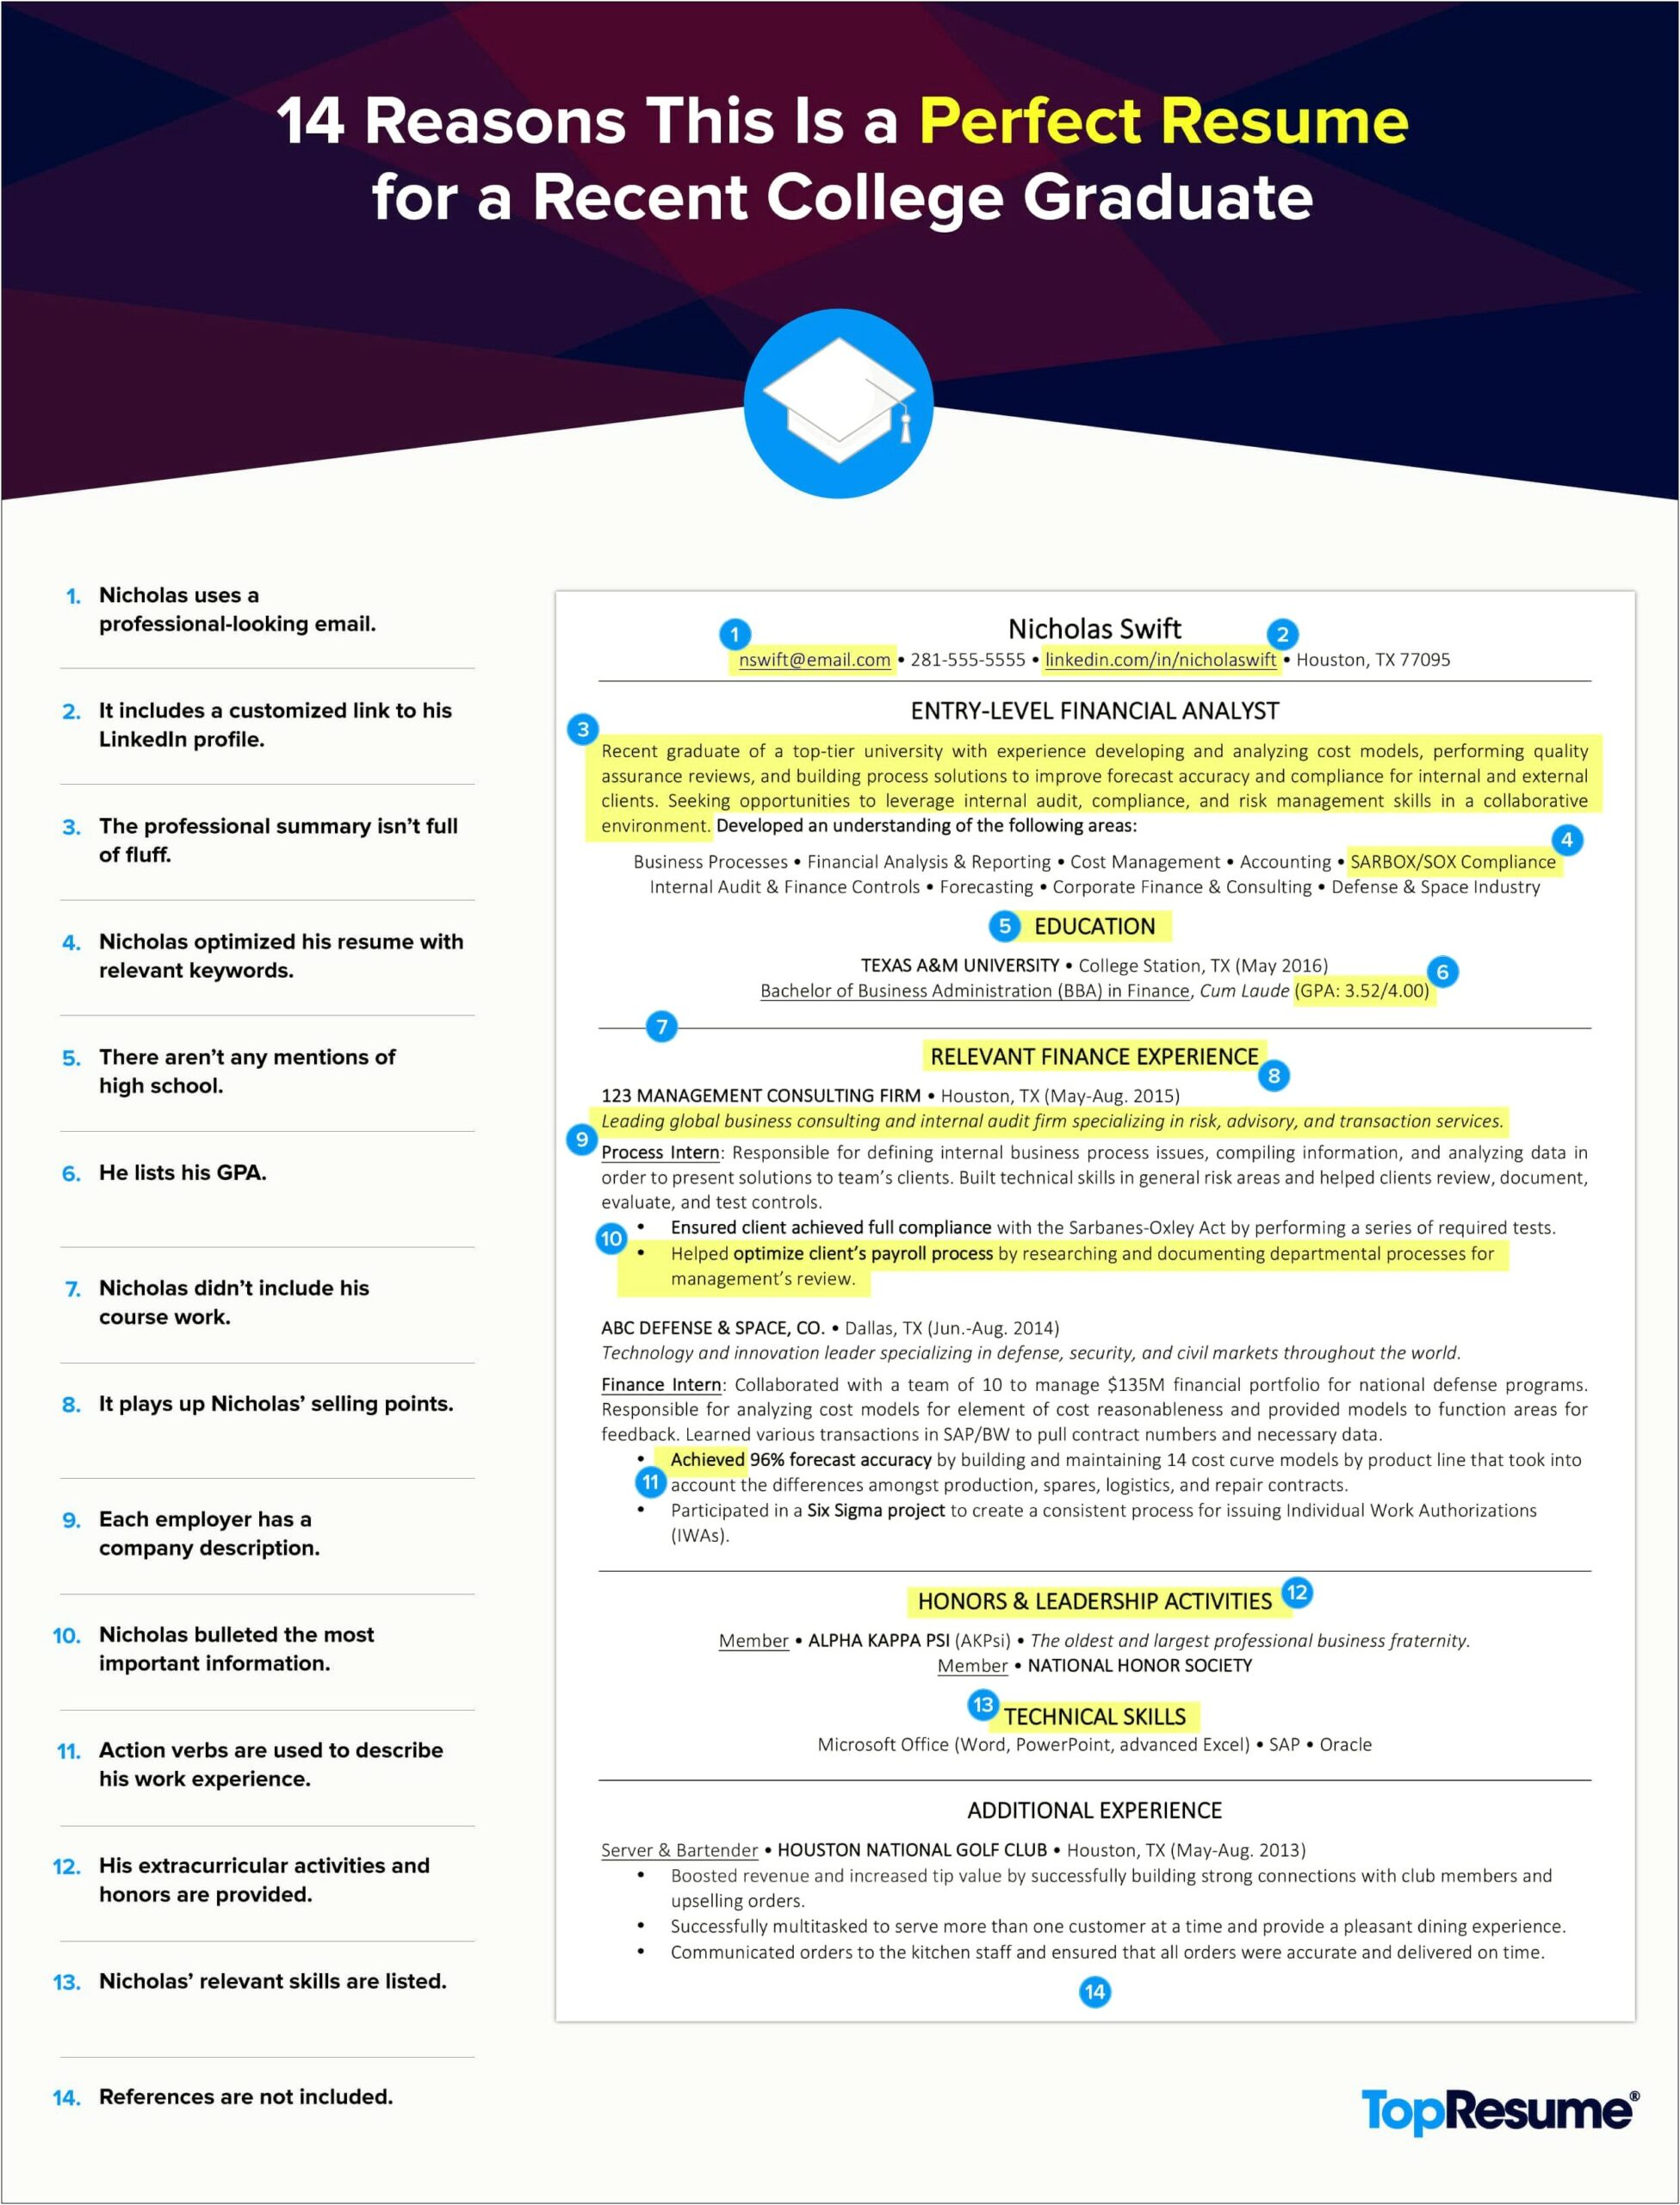 Resume Objective Statements For Grad School